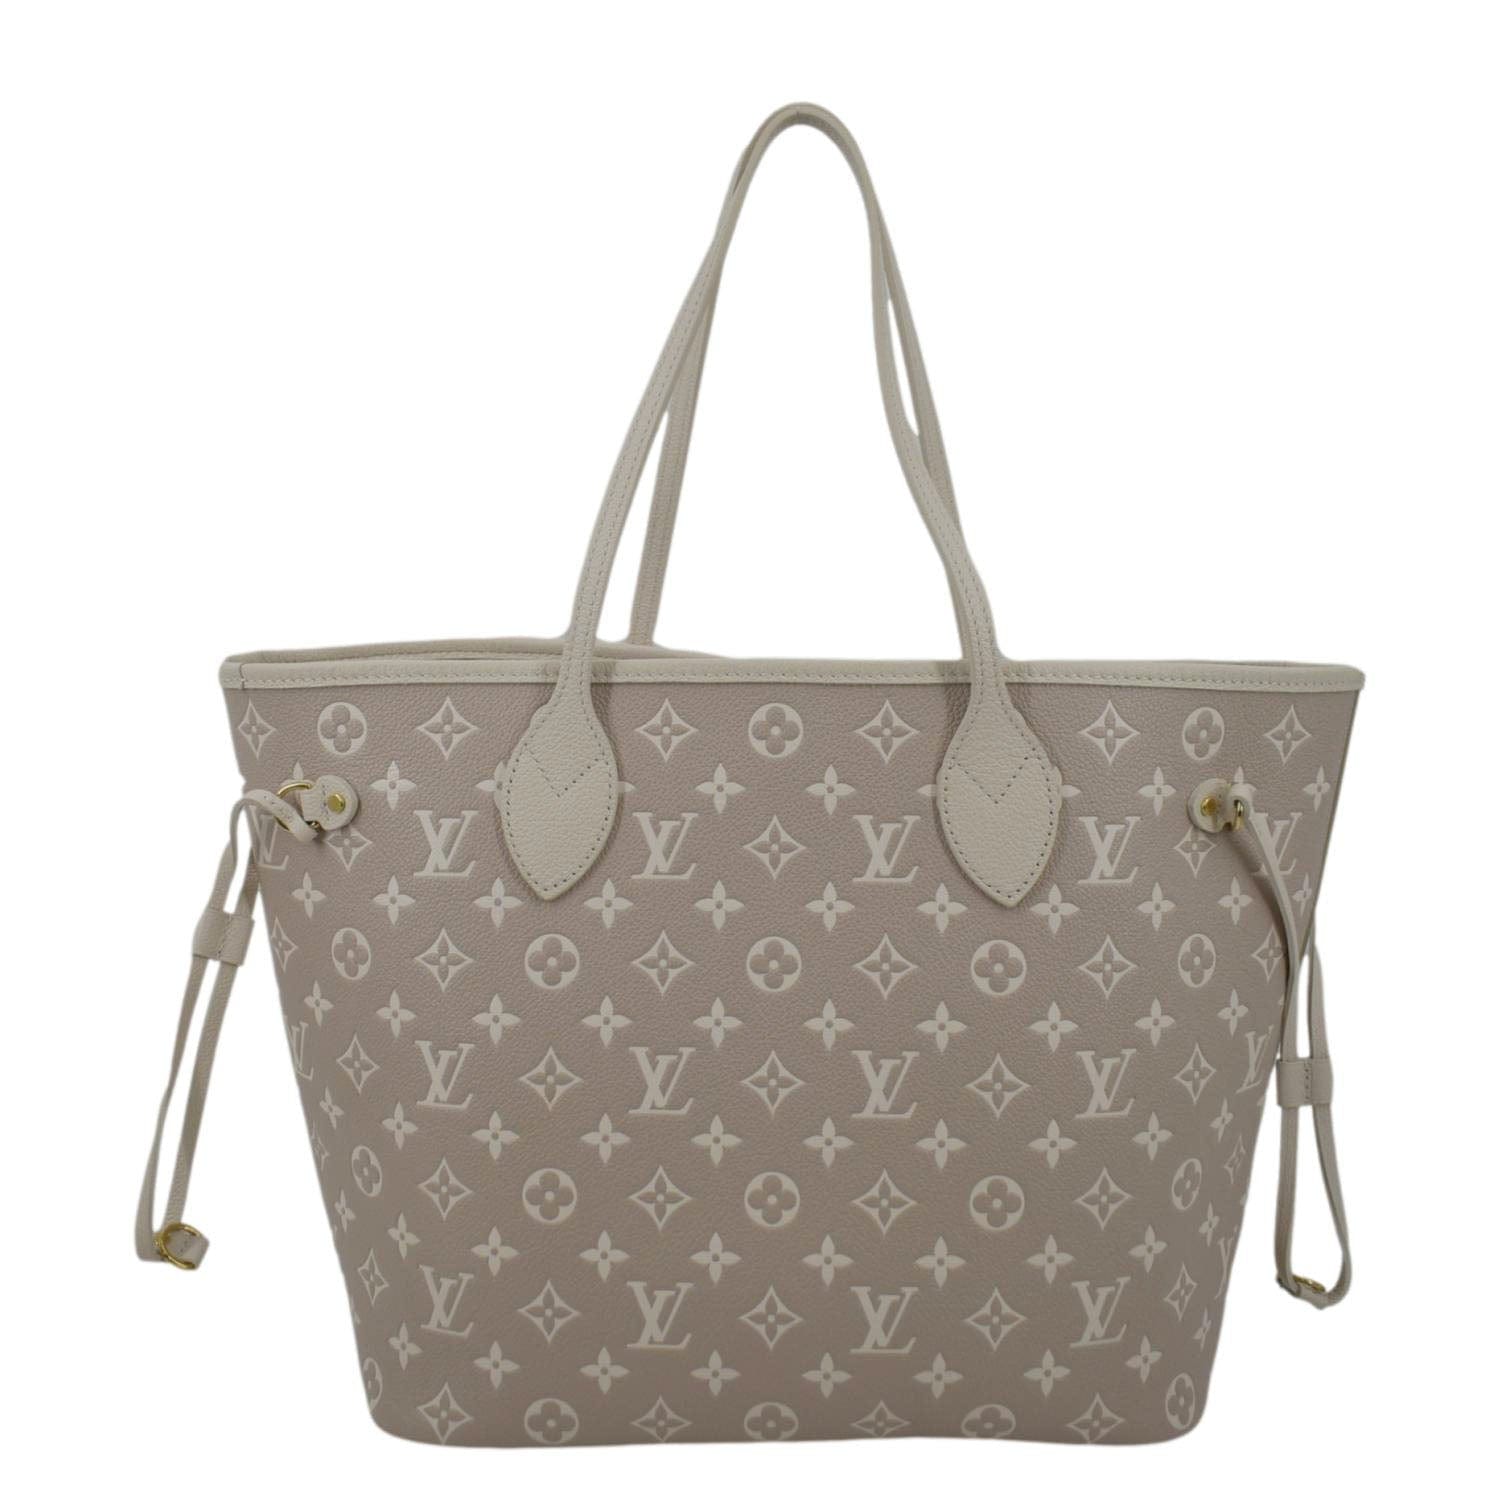 Louis Vuitton Neverfull mm Spring City Leather Tote Shoulder Bag Bicolor